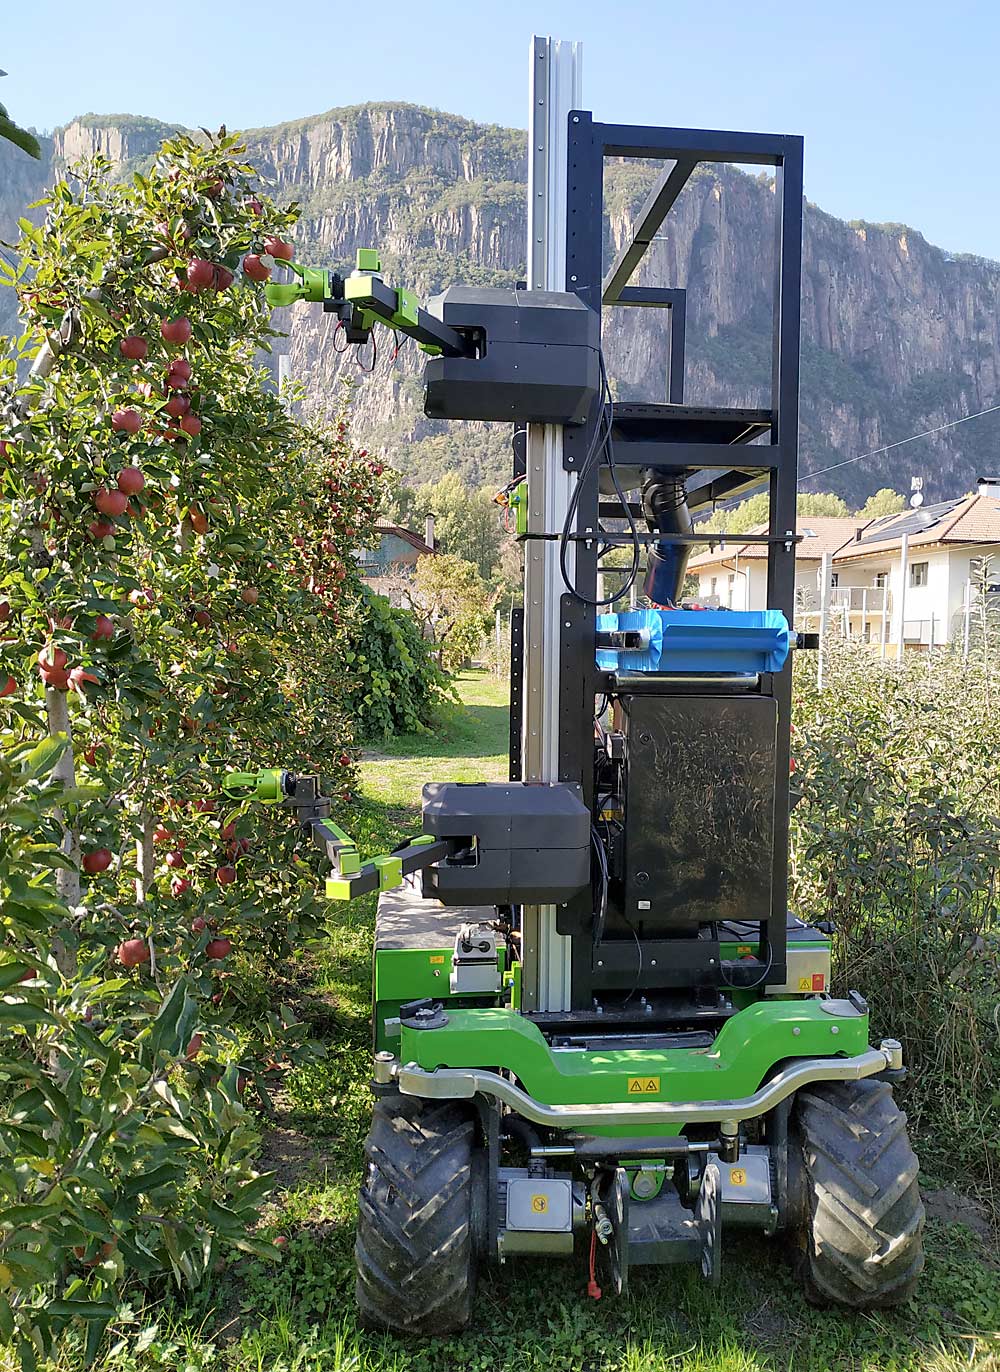 The robotic harvester built by Aigritec of Italy picks apples in a demonstration. It uses a fingered end effector with vertical and horizontal conveyor belts. (Courtesy Aigritec)